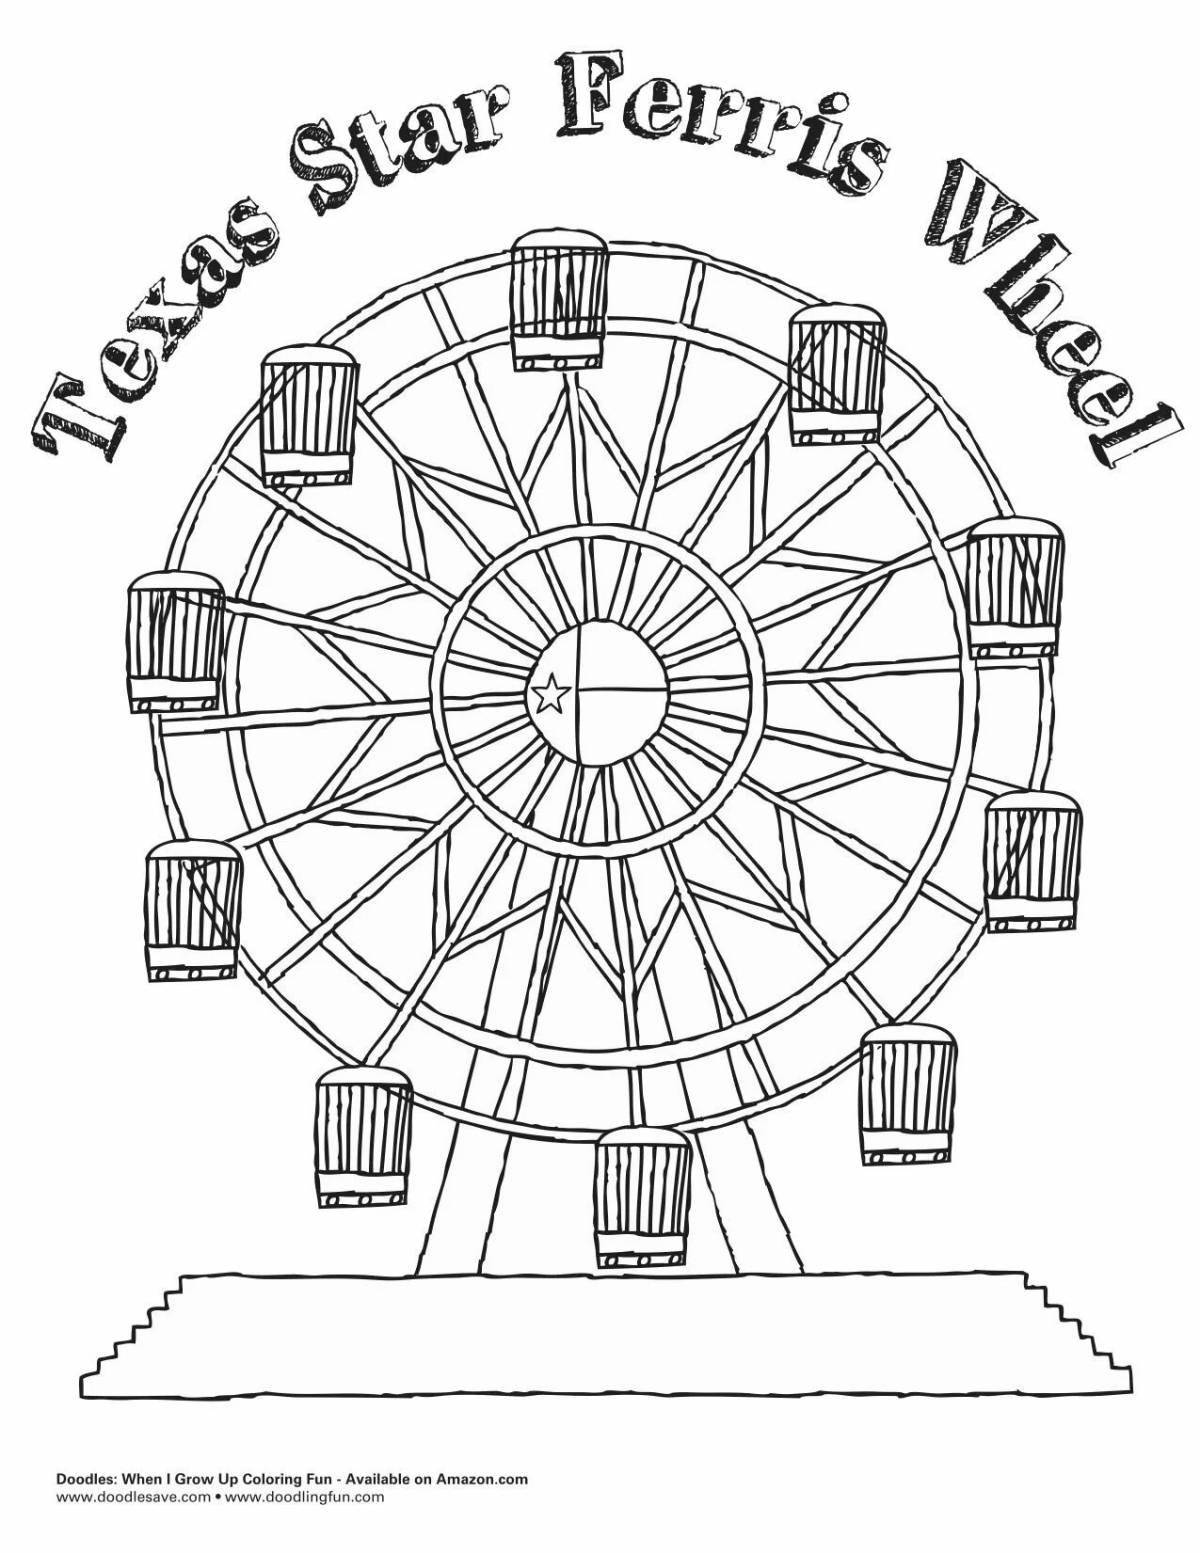 Amazing ferris wheel coloring book for kids